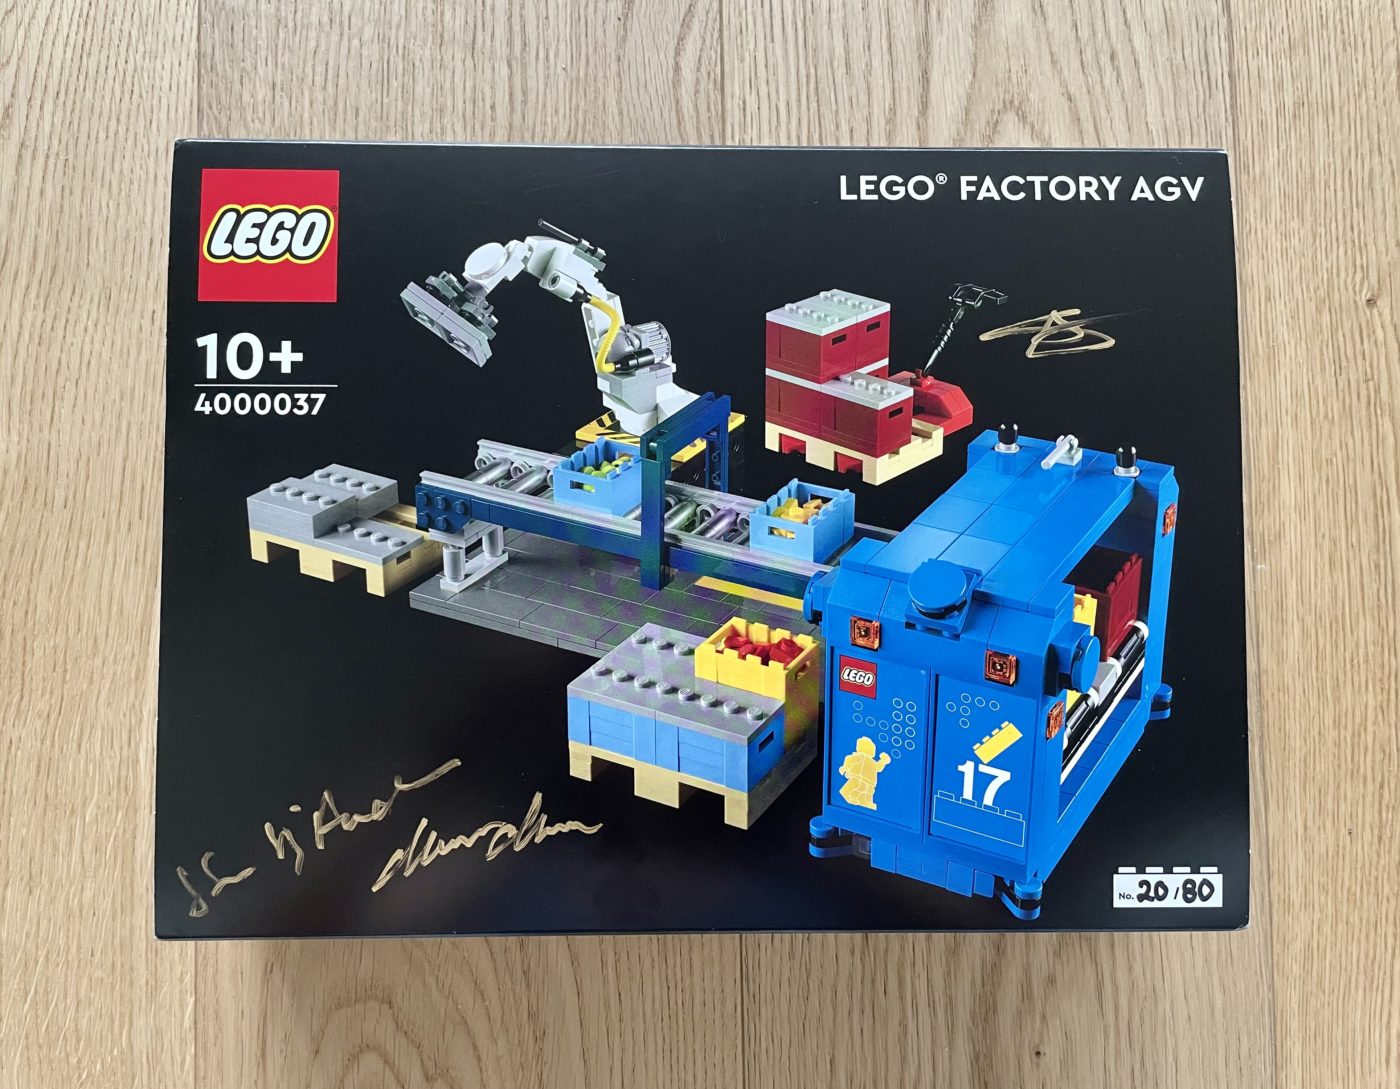 Exclusive look at the 2022 Inside Tour set - 4000037 LEGO Factory AGV - Jay's Brick Blog